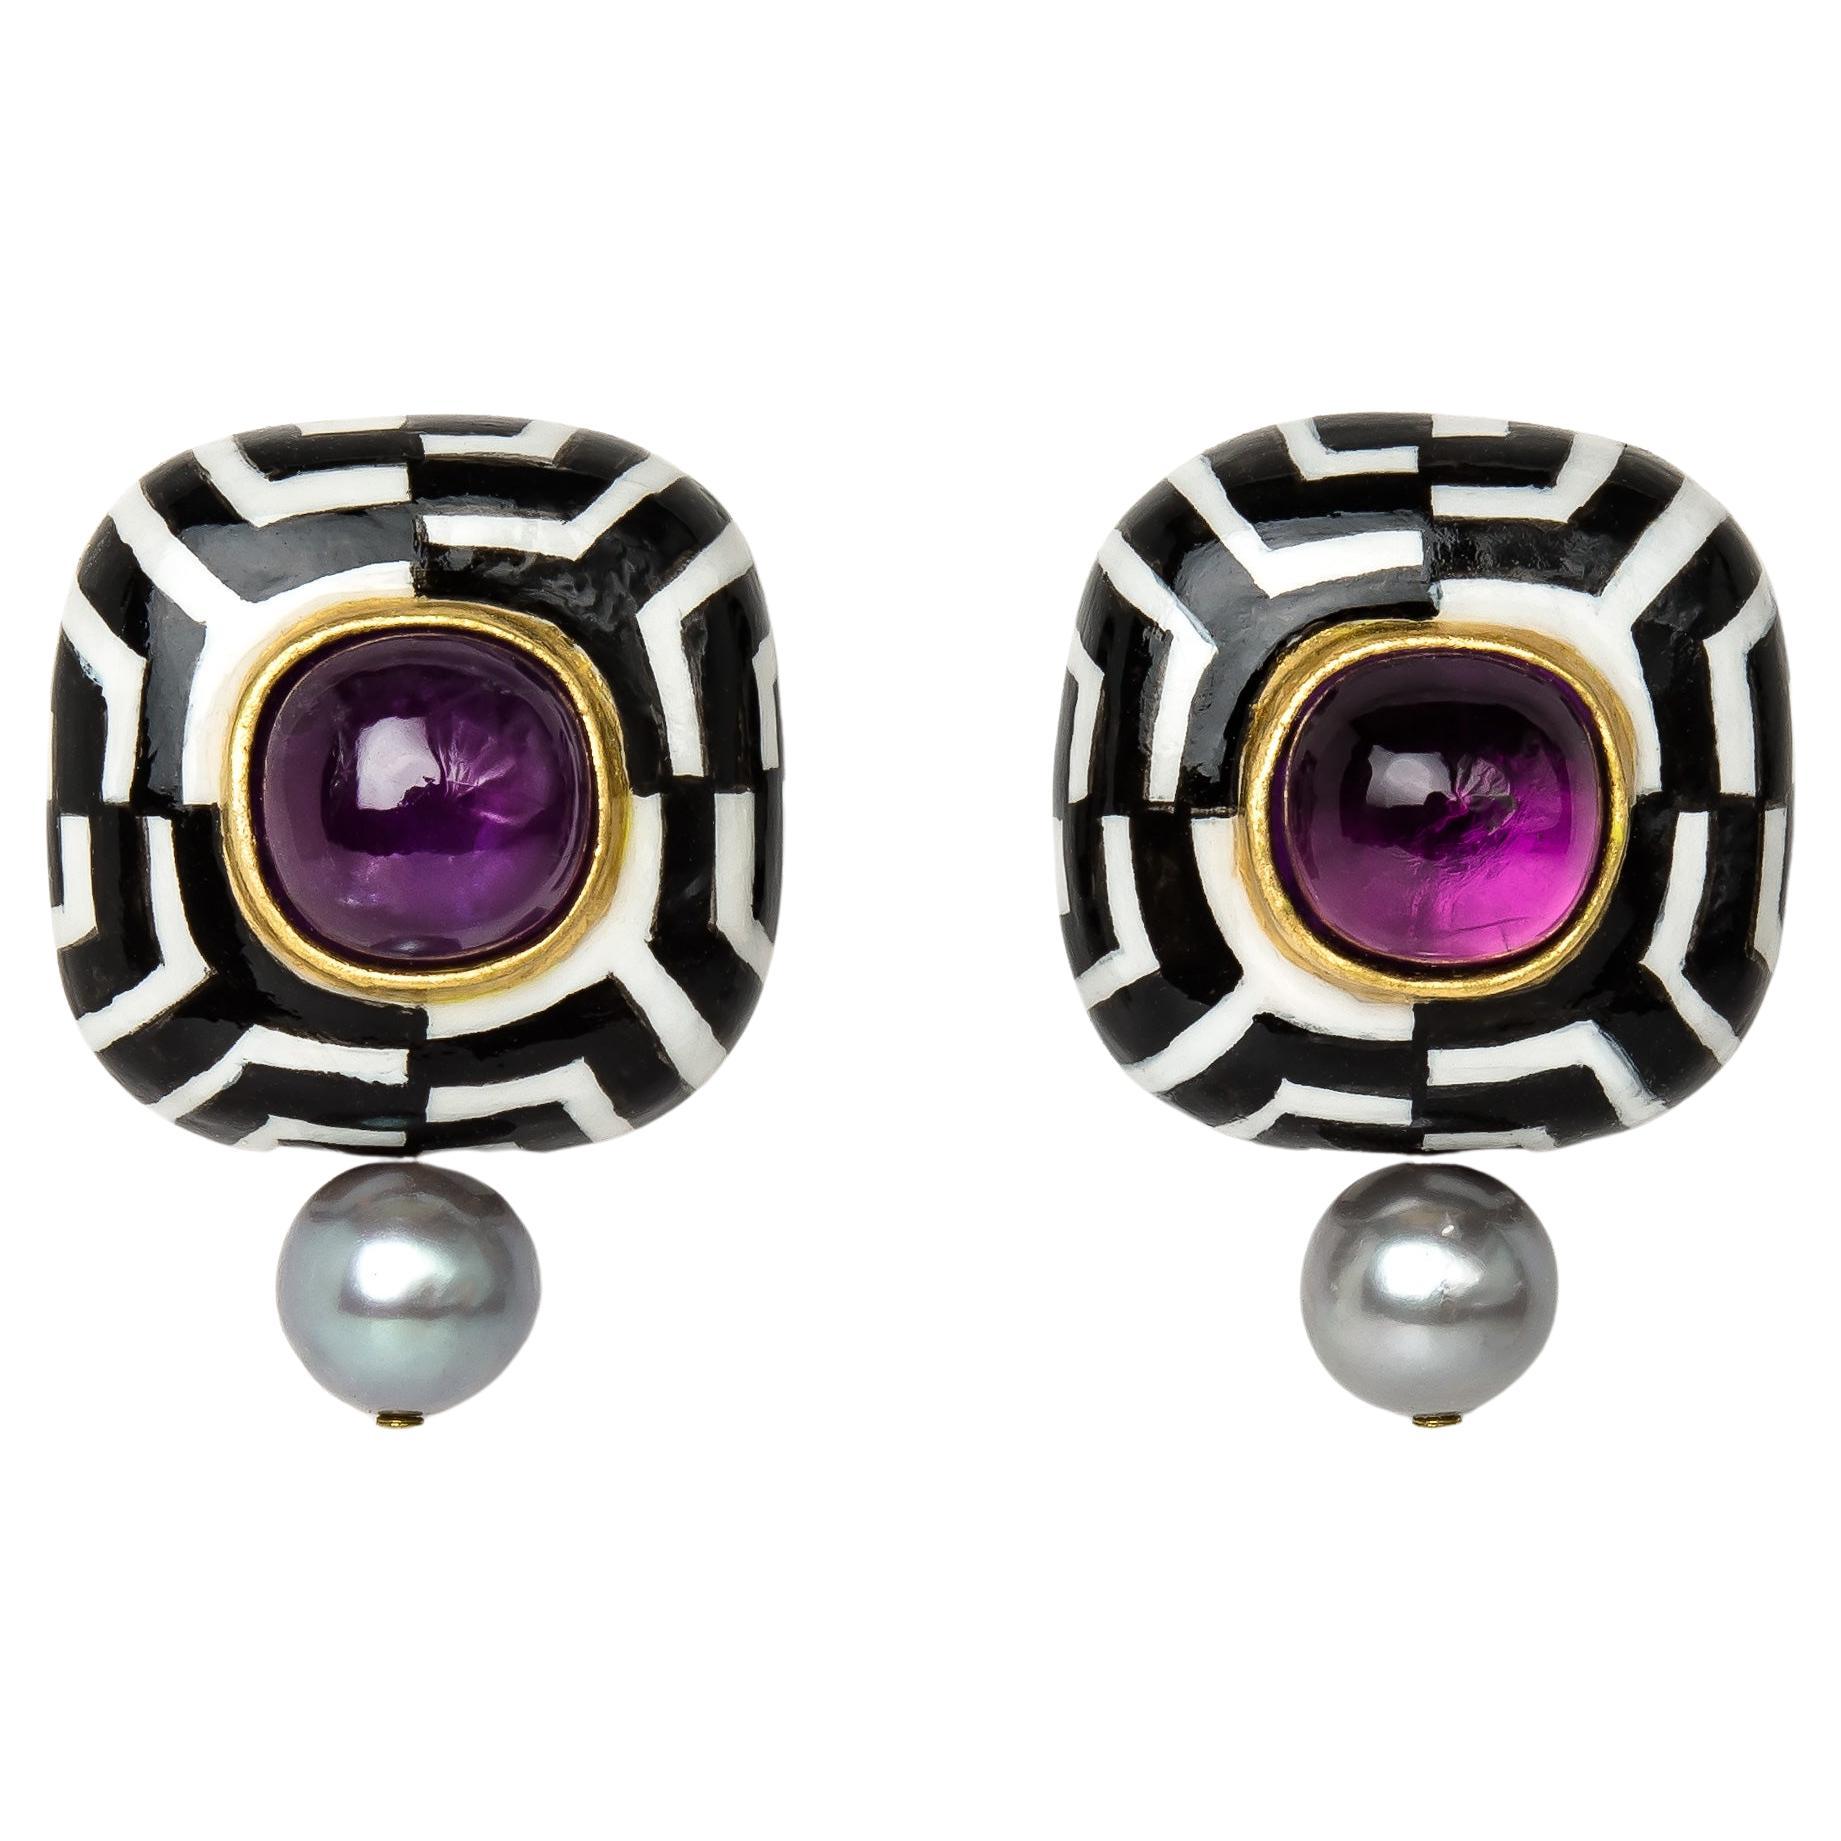 Bodyfurnitures Stud Earrings, Hypnotic Black and White, Amethyst, Pearl, Silver For Sale